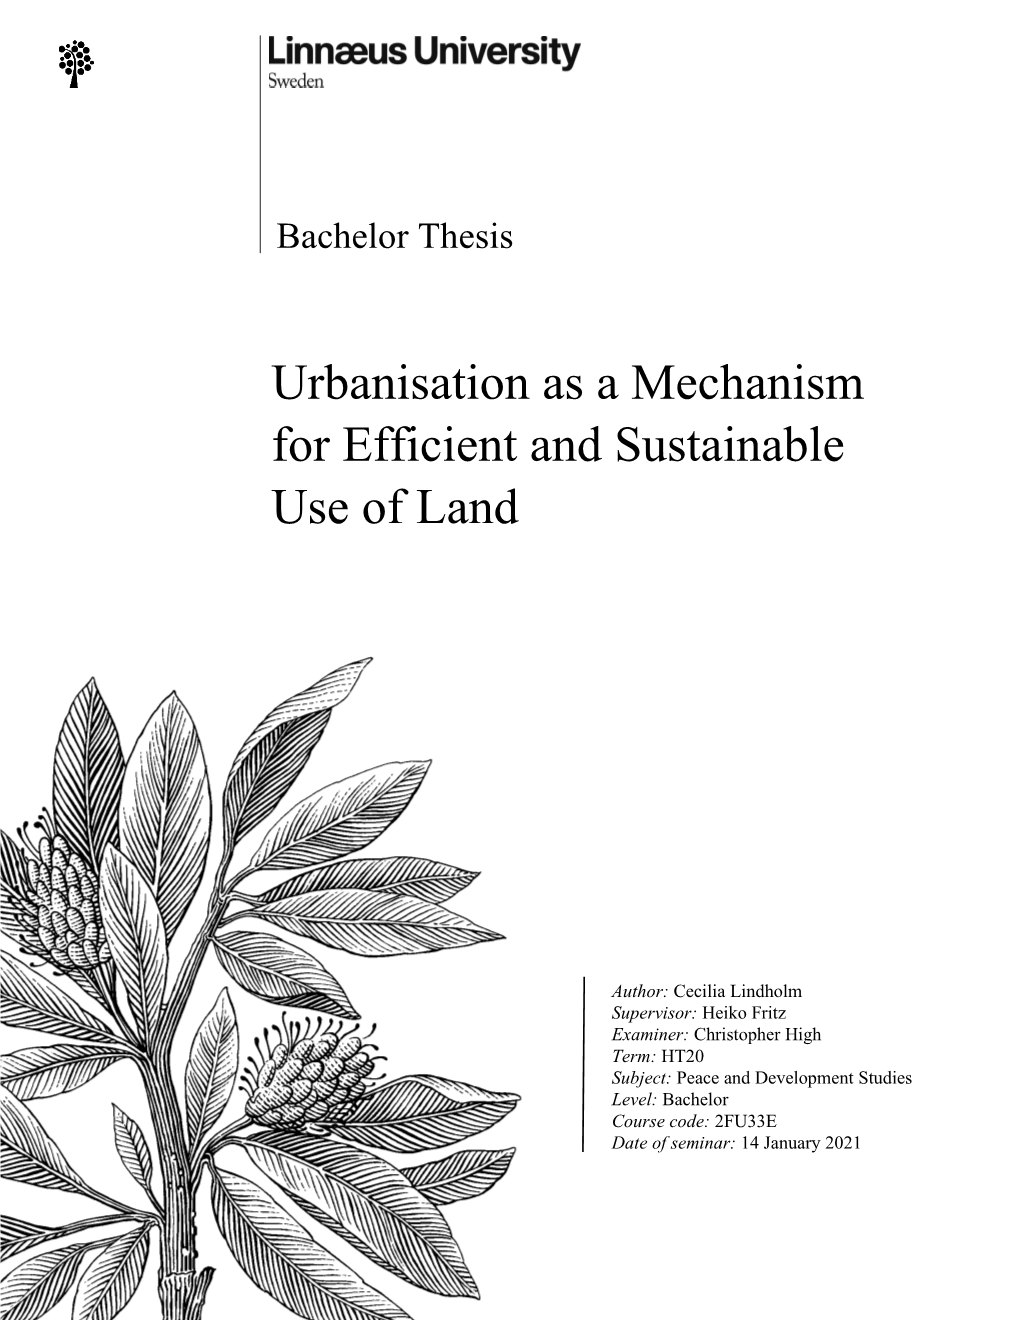 Urbanisation As a Mechanism for Efficient and Sustainable Use of Land